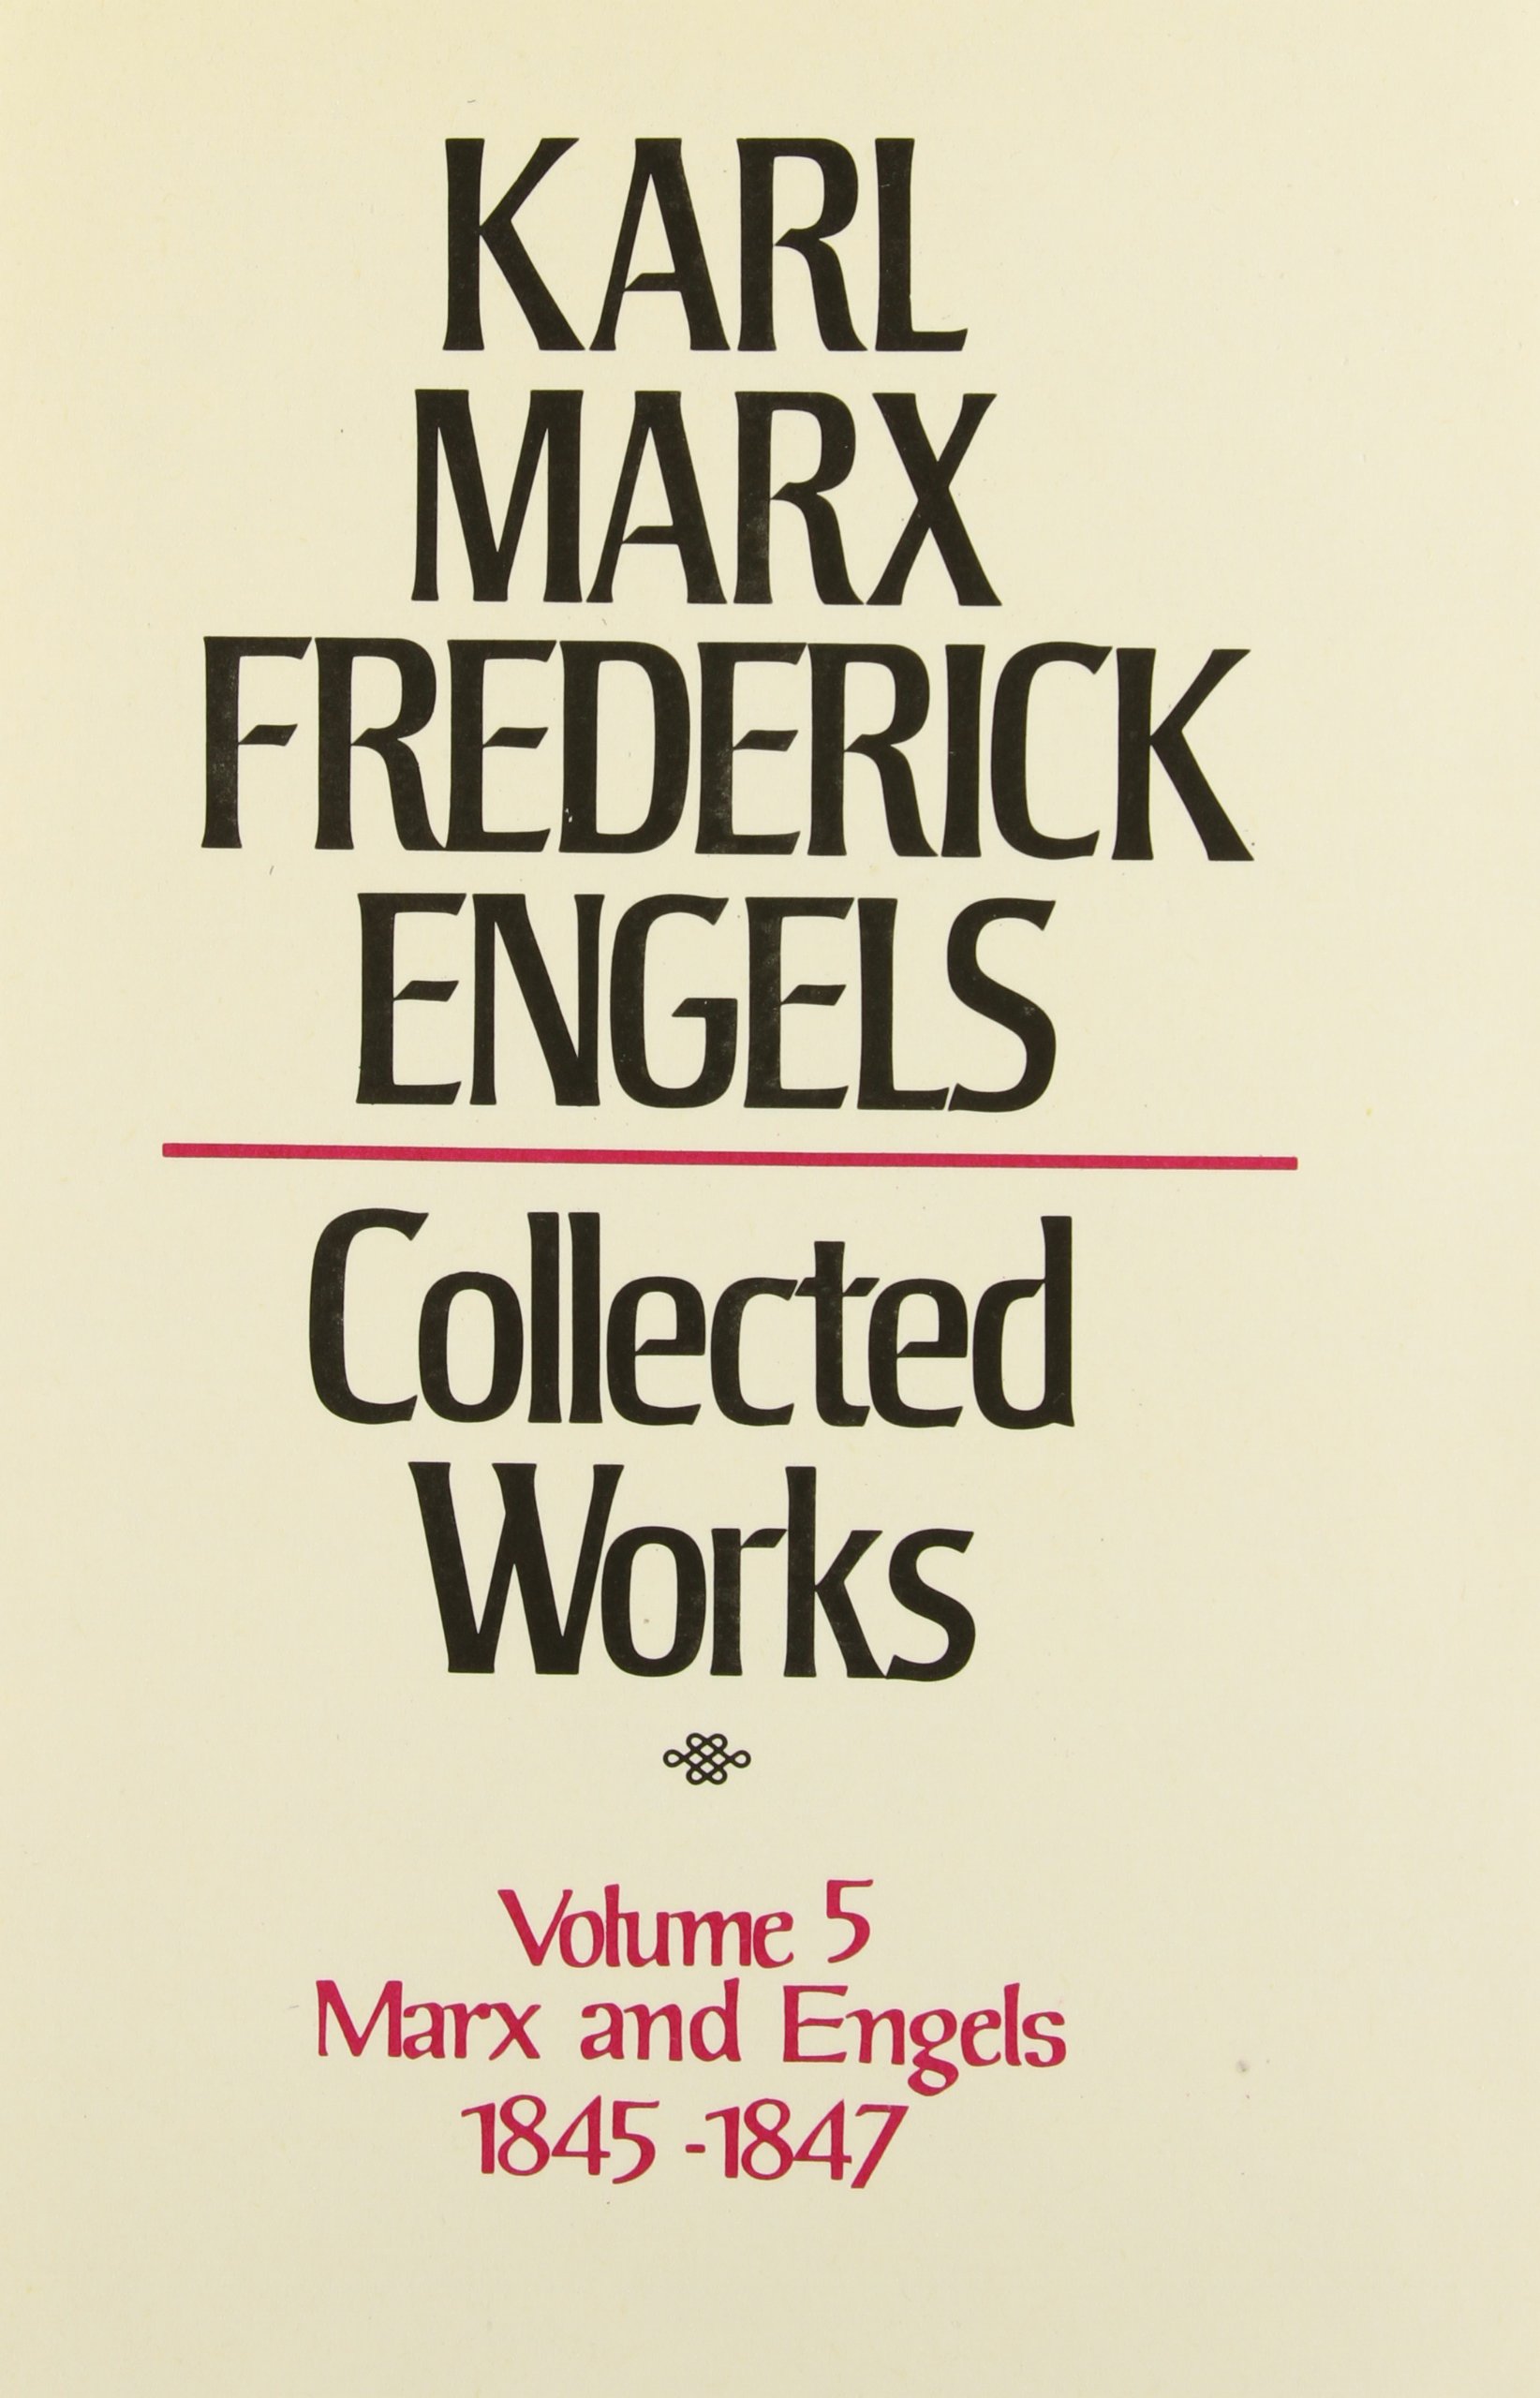 Marx/Engels Collected Works